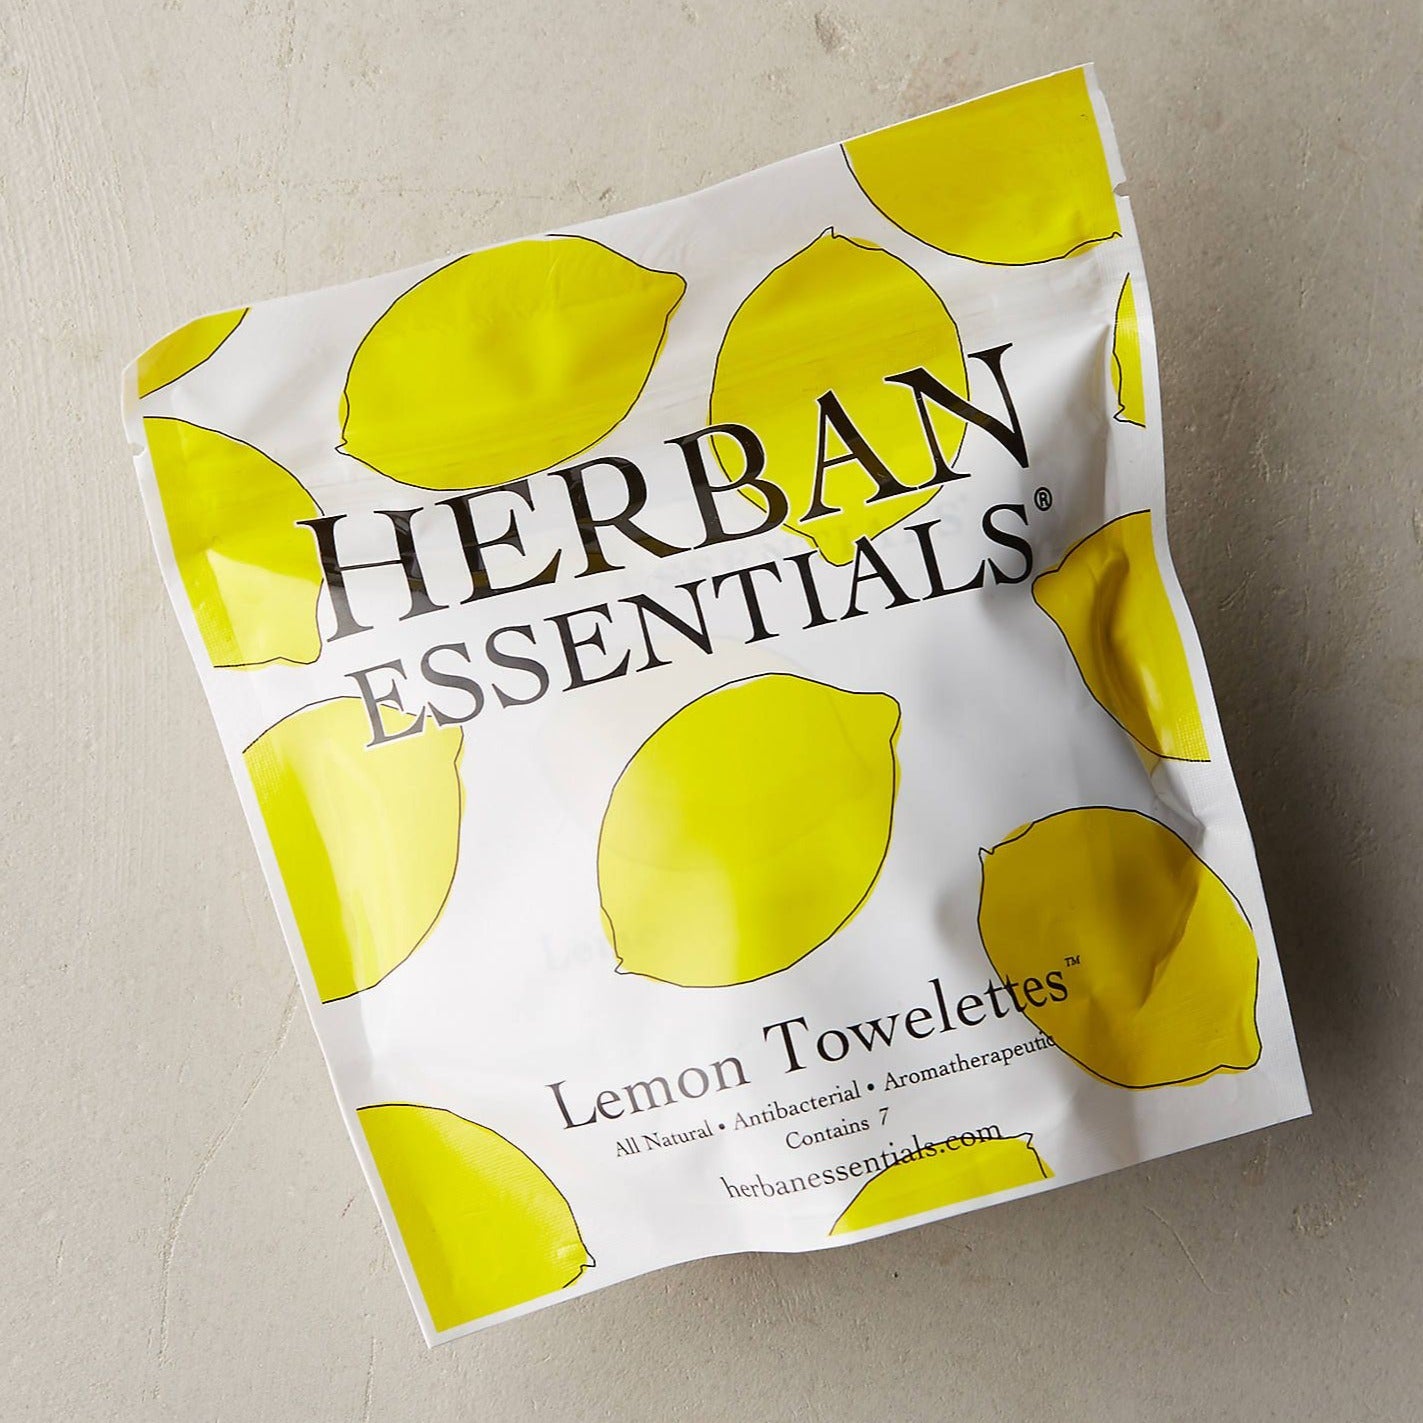 Seven Pack of Lemon Towelettes by Herban Essentials